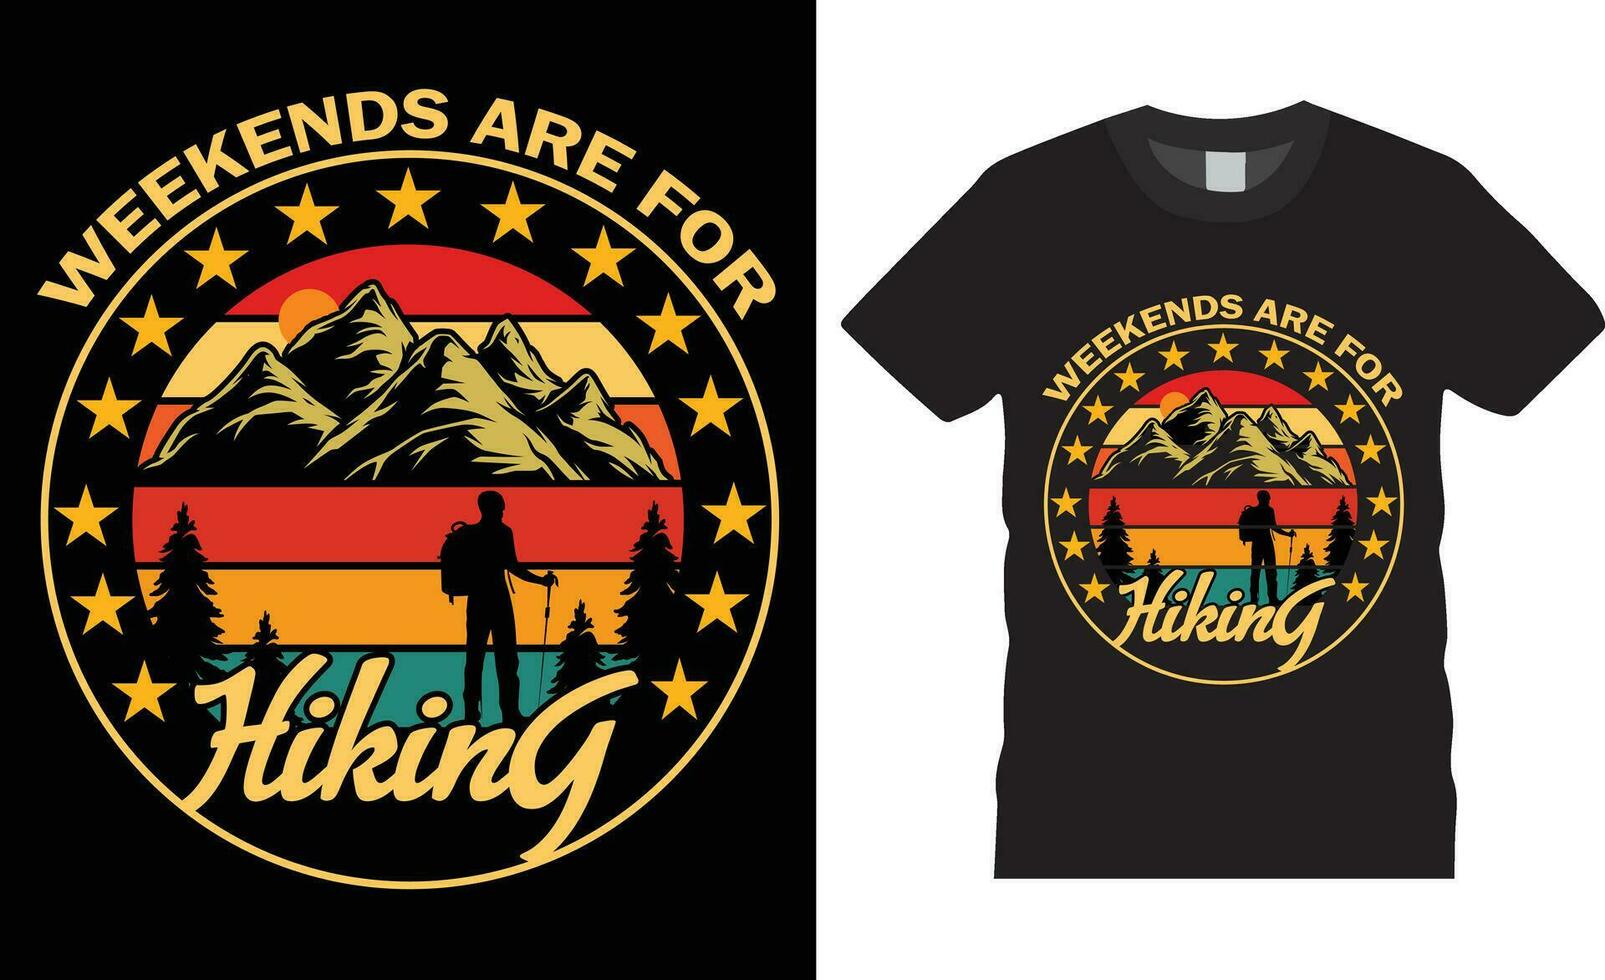 Hiking typography t-shirt design Vector print Template.Weekends are for hiking